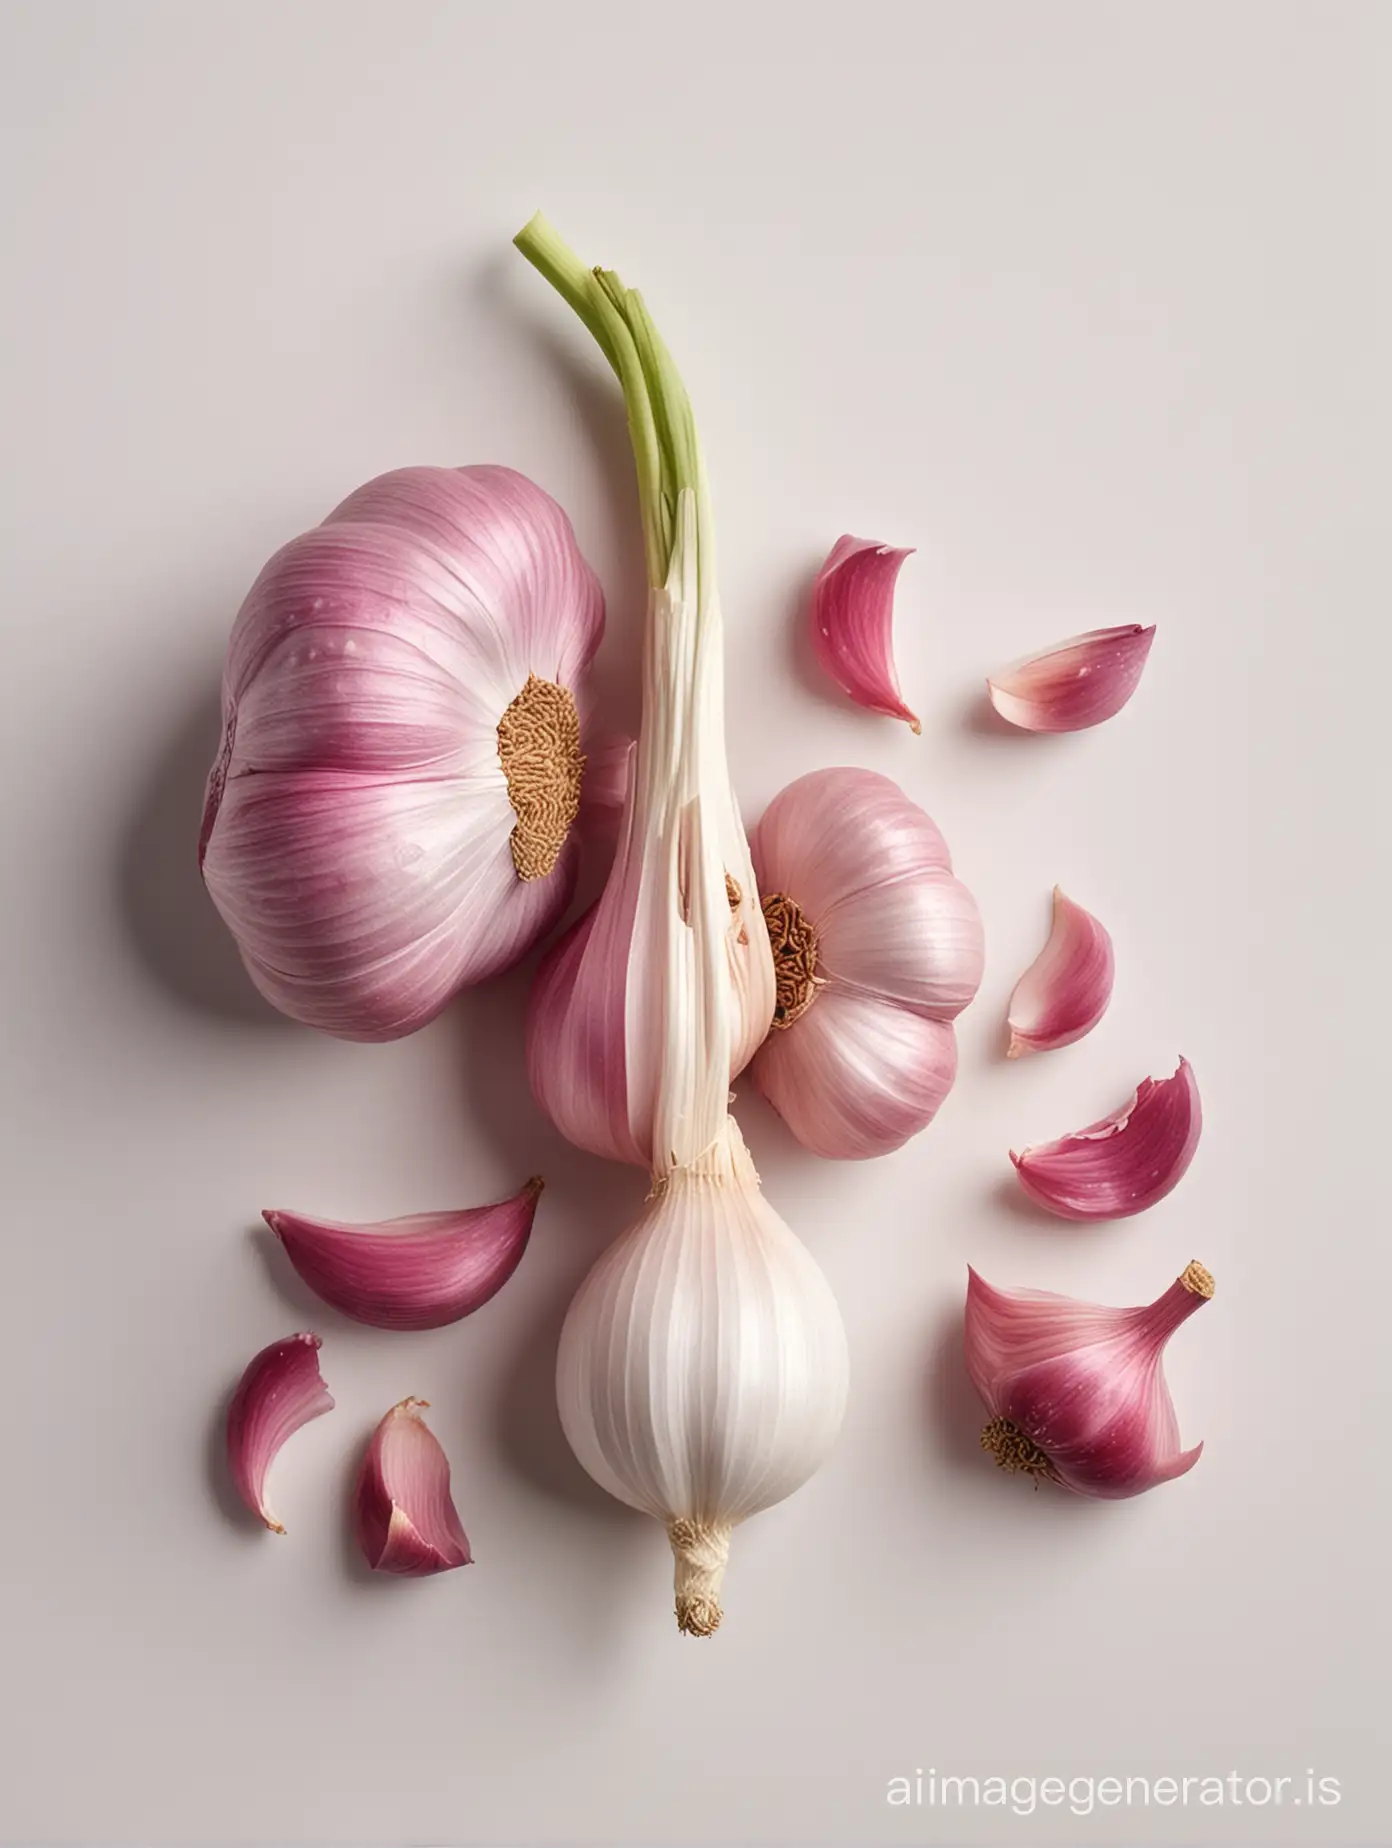 A pink garlic clove in the style of a medieval image, white background